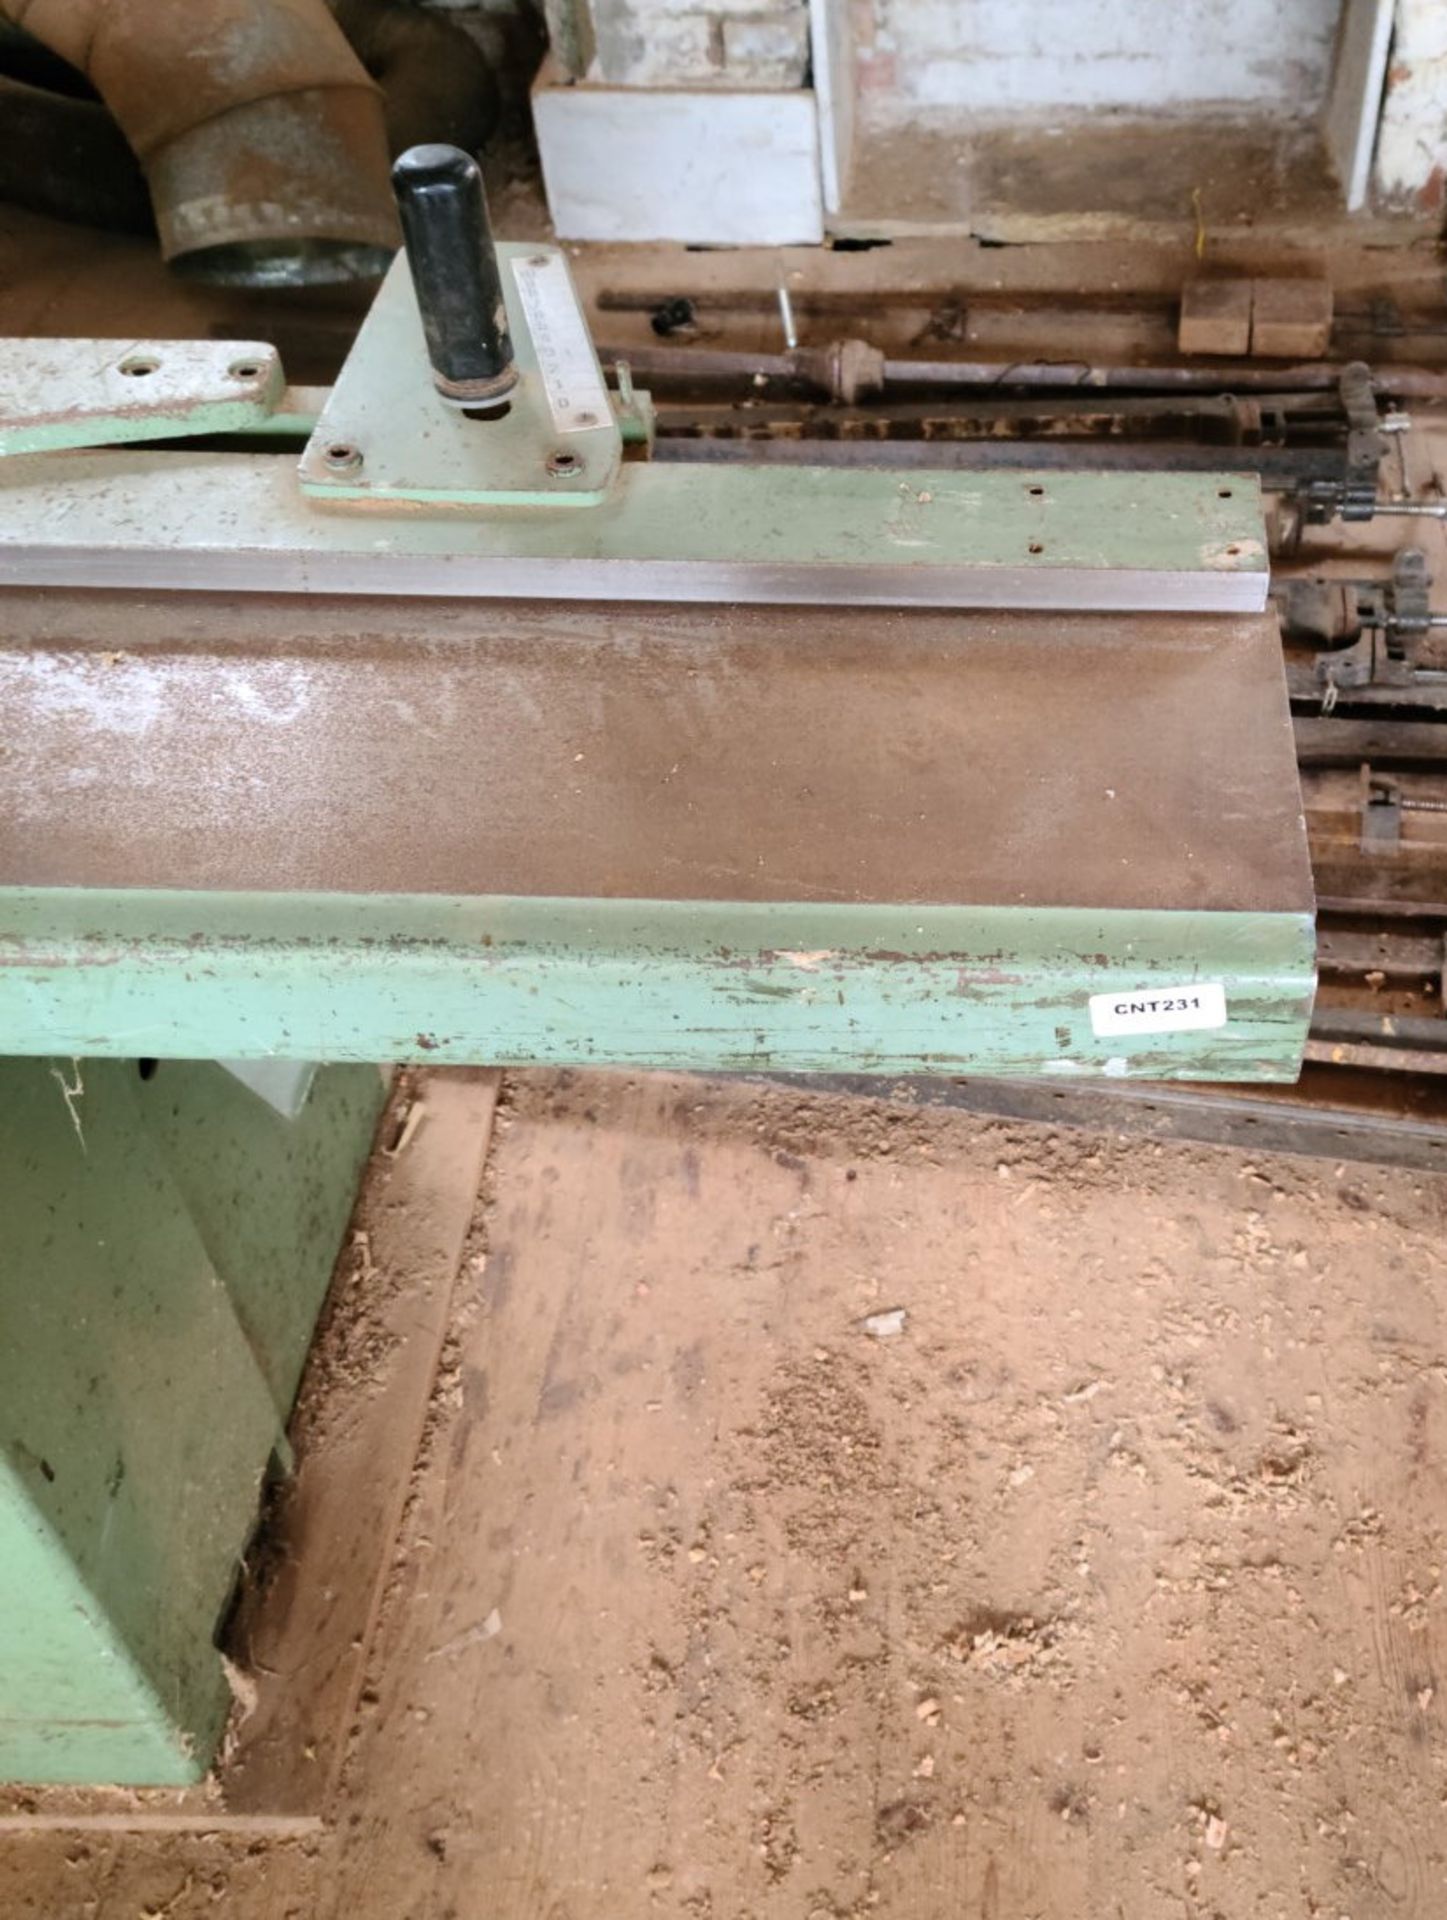 1 x Guilliet 4-Sided Planer With a 1.8m Straightening Table - Ref: CNT231 - CL846 - Location: Oxfor - Image 4 of 12